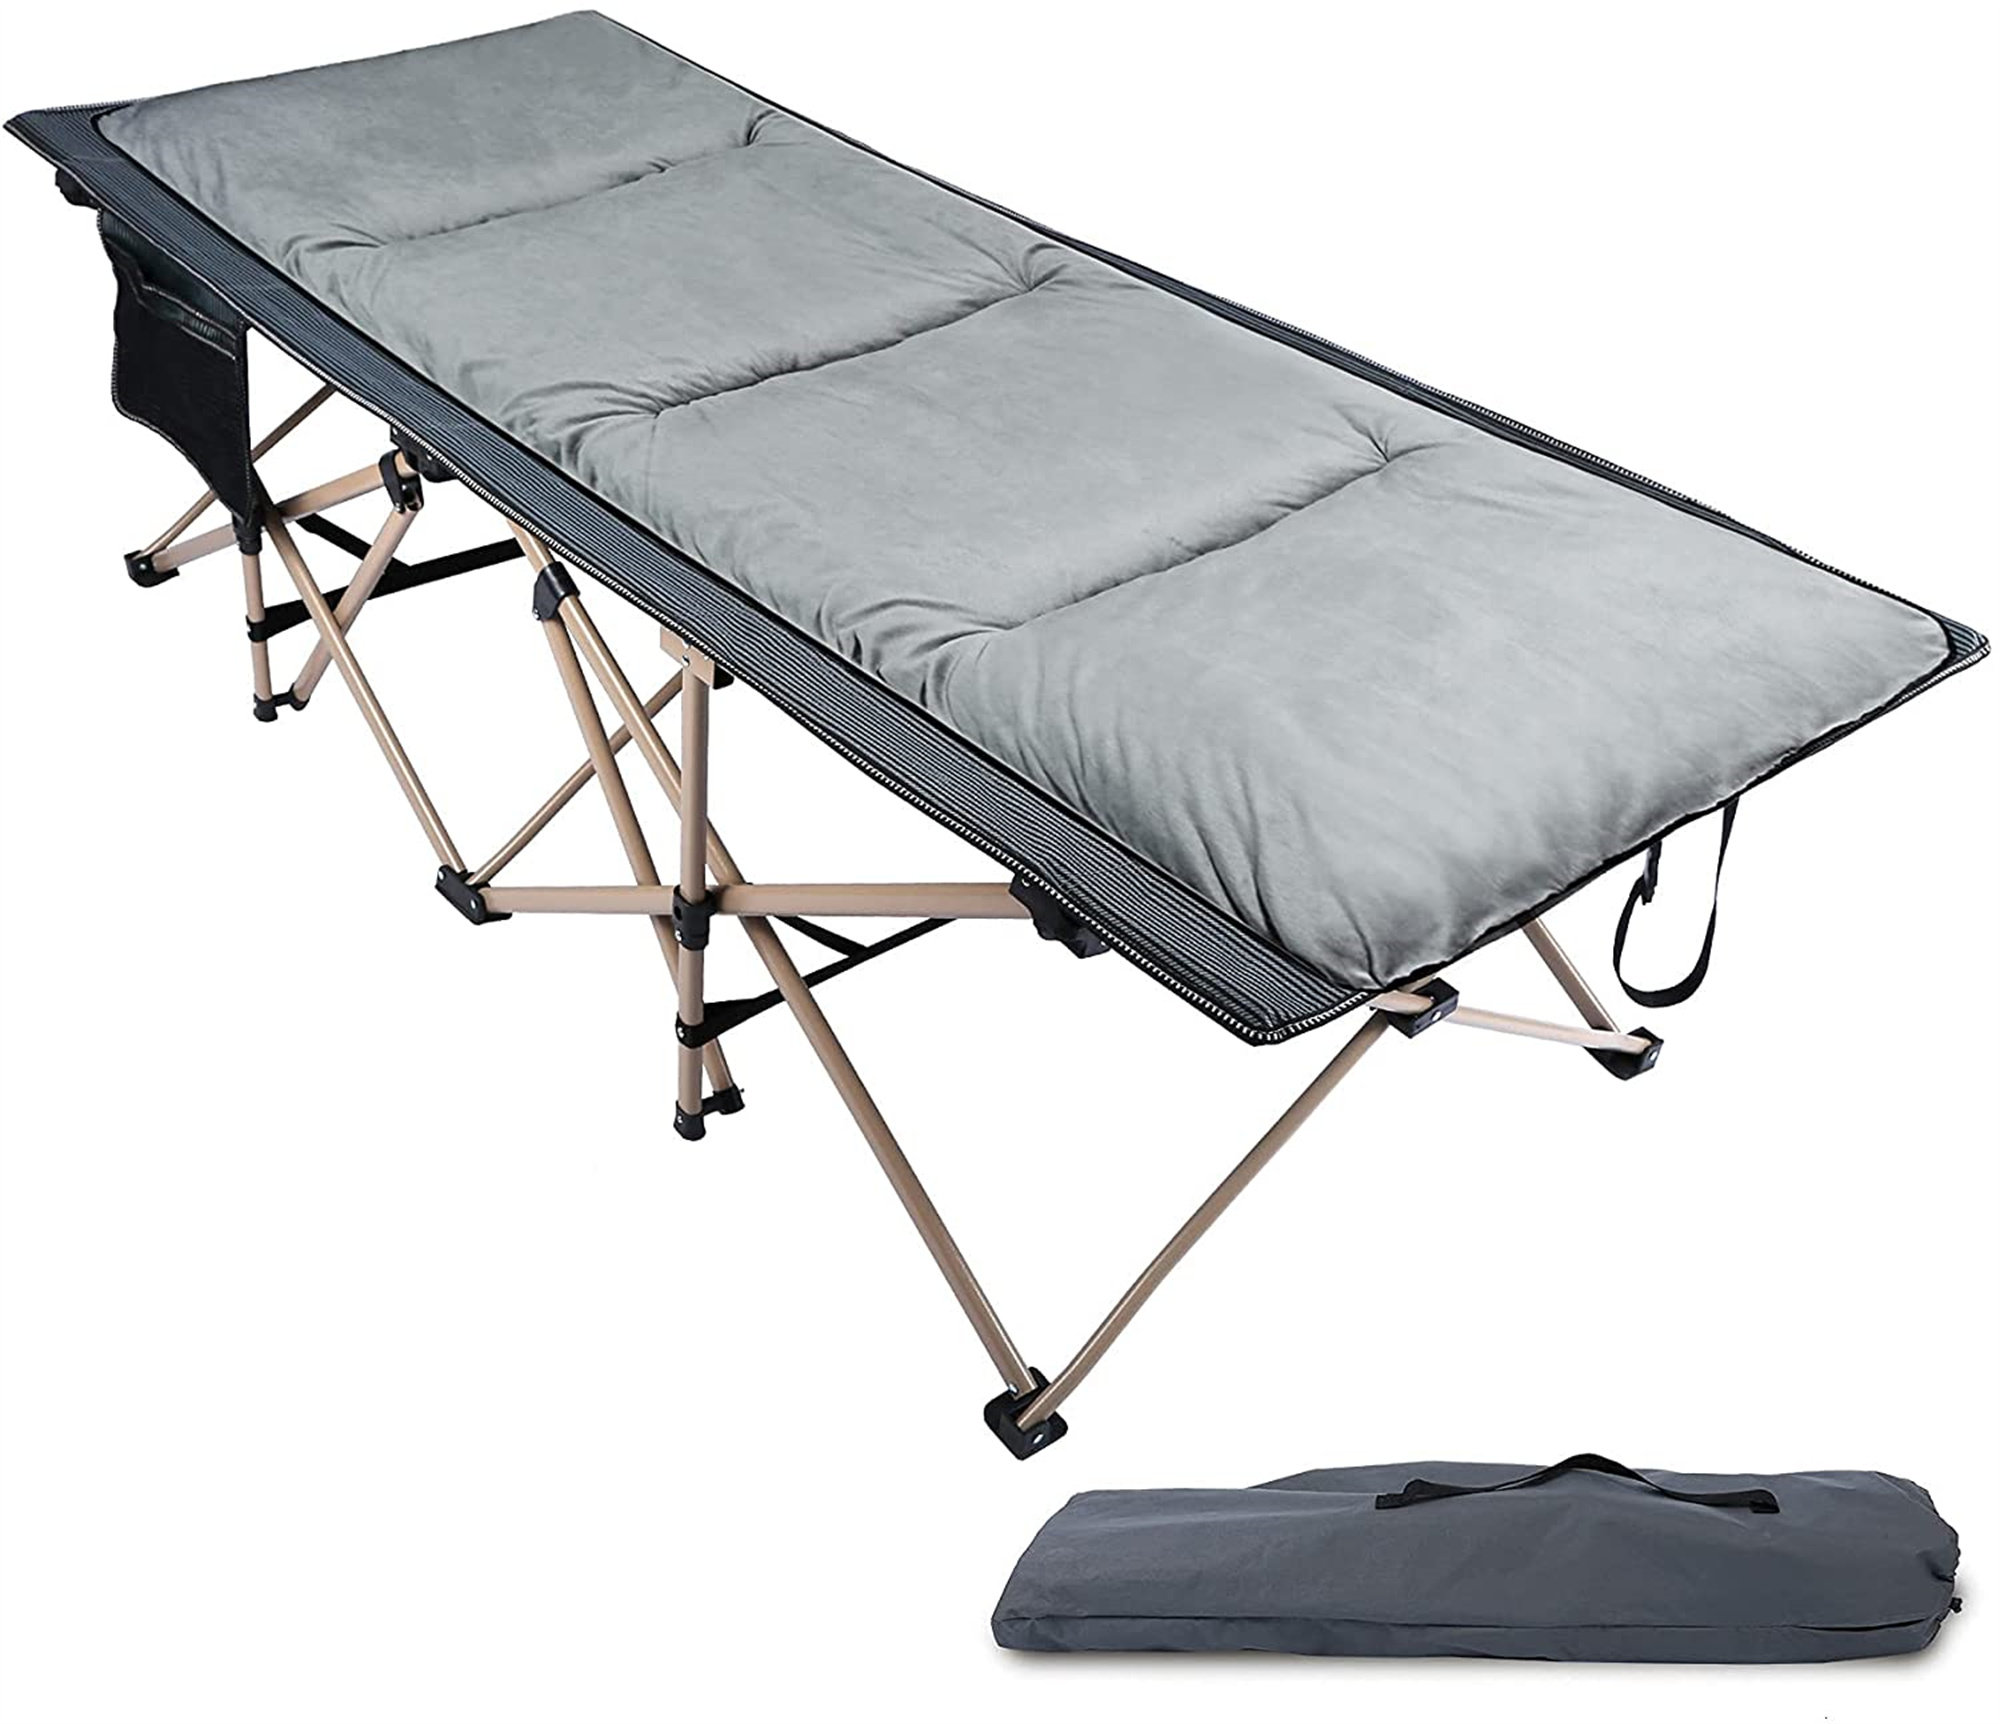 Blue Gray Green REDCAMP Folding Camping Cots for Adults Heavy Duty 28-33 Extra Wide Sturdy Portable Sleeping Cot for Camp Office Use 